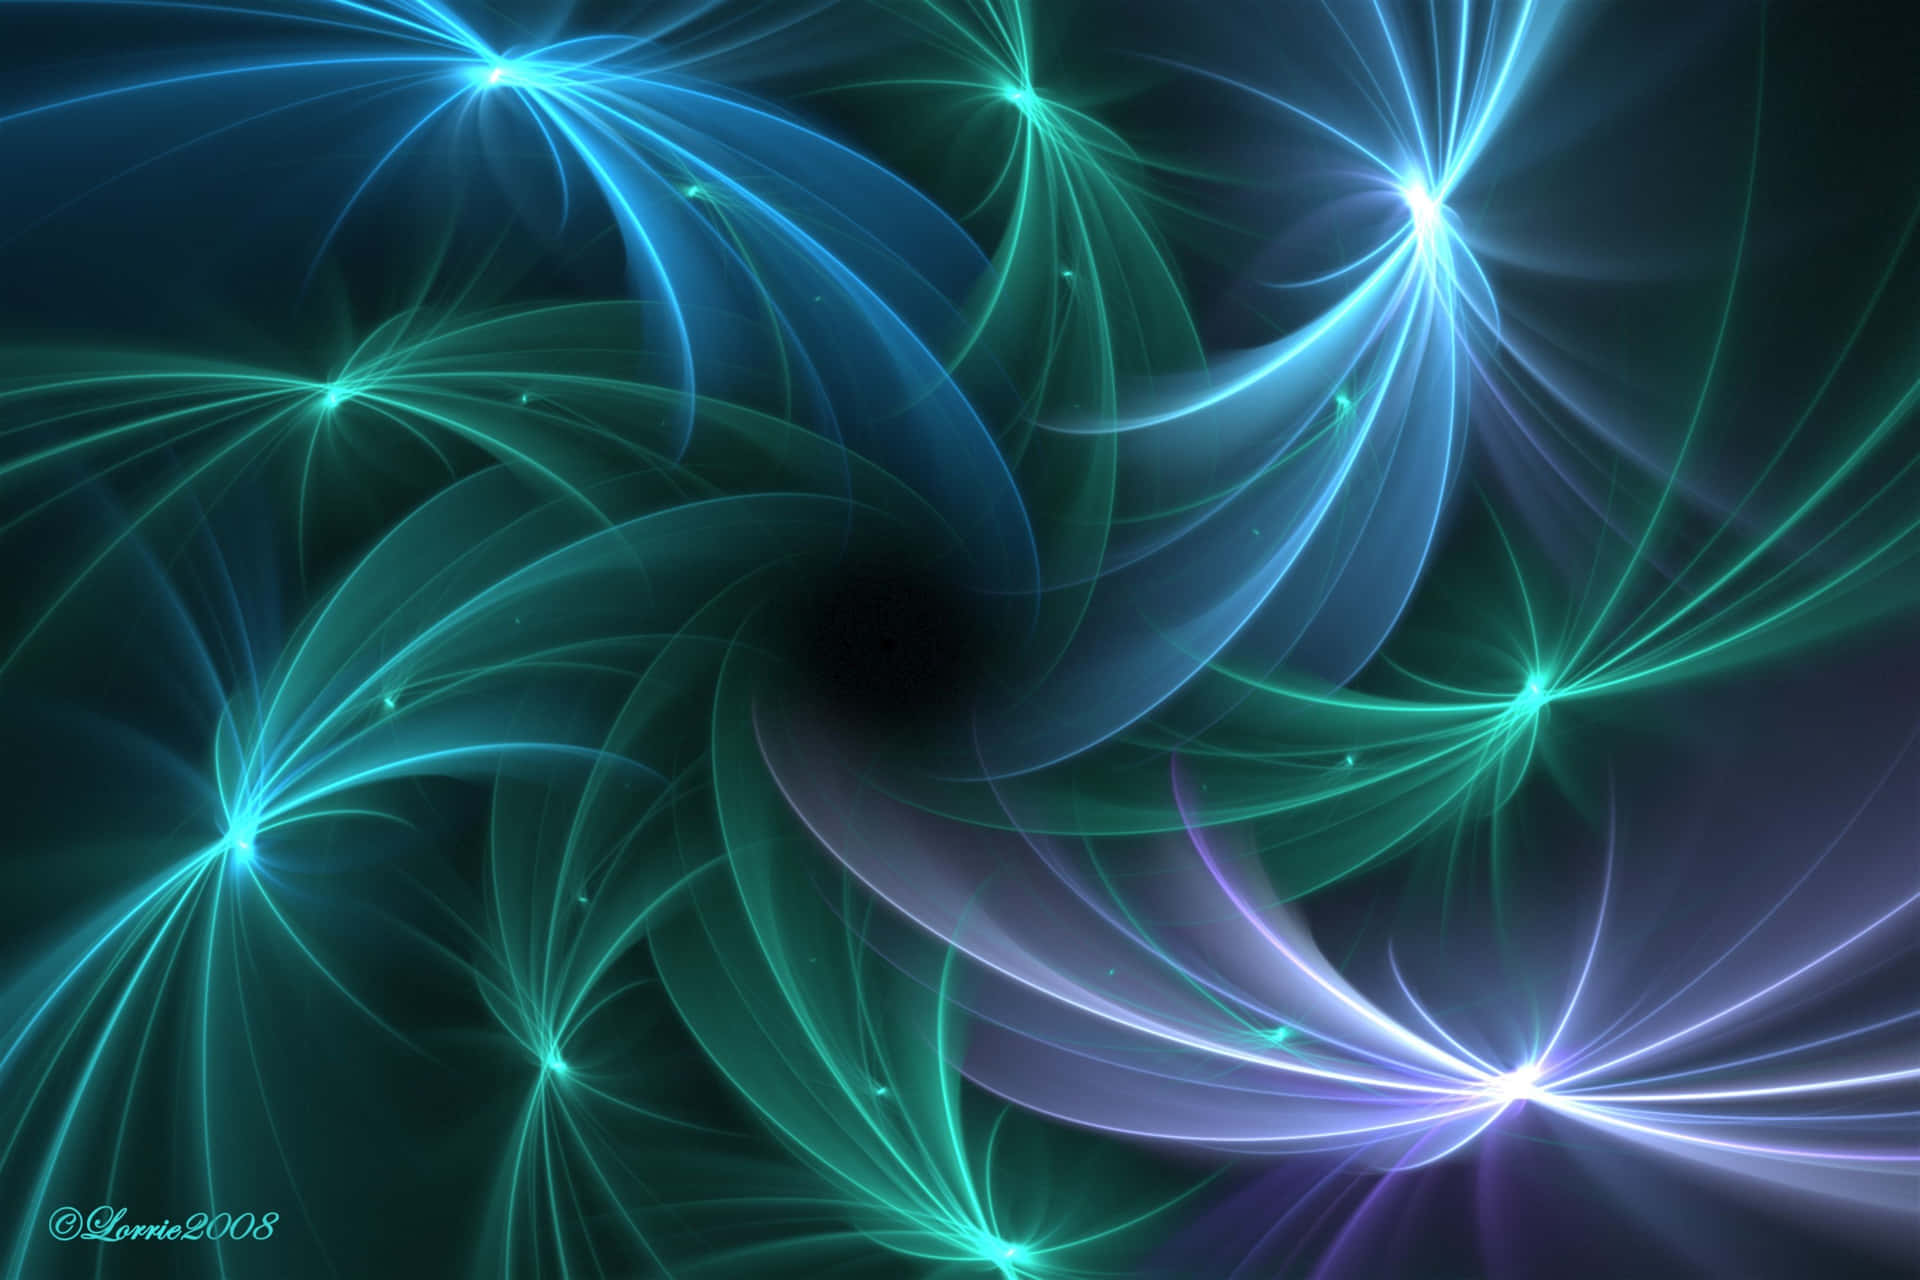 A Blue And Green Swirling Pattern Wallpaper